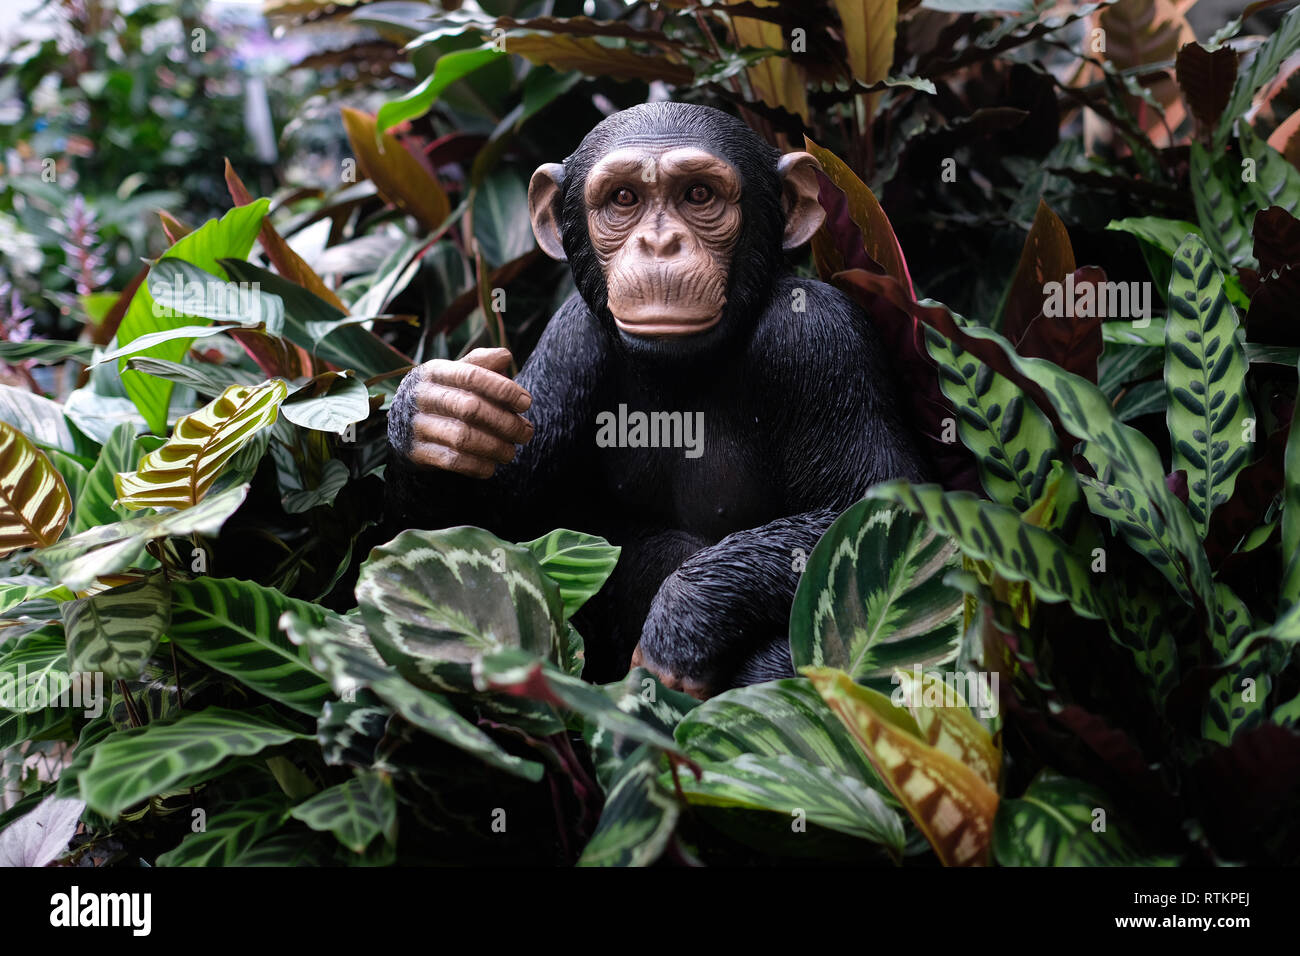 March 2019 - Realistic looking plastic chimpanzee in a store display Stock Photo